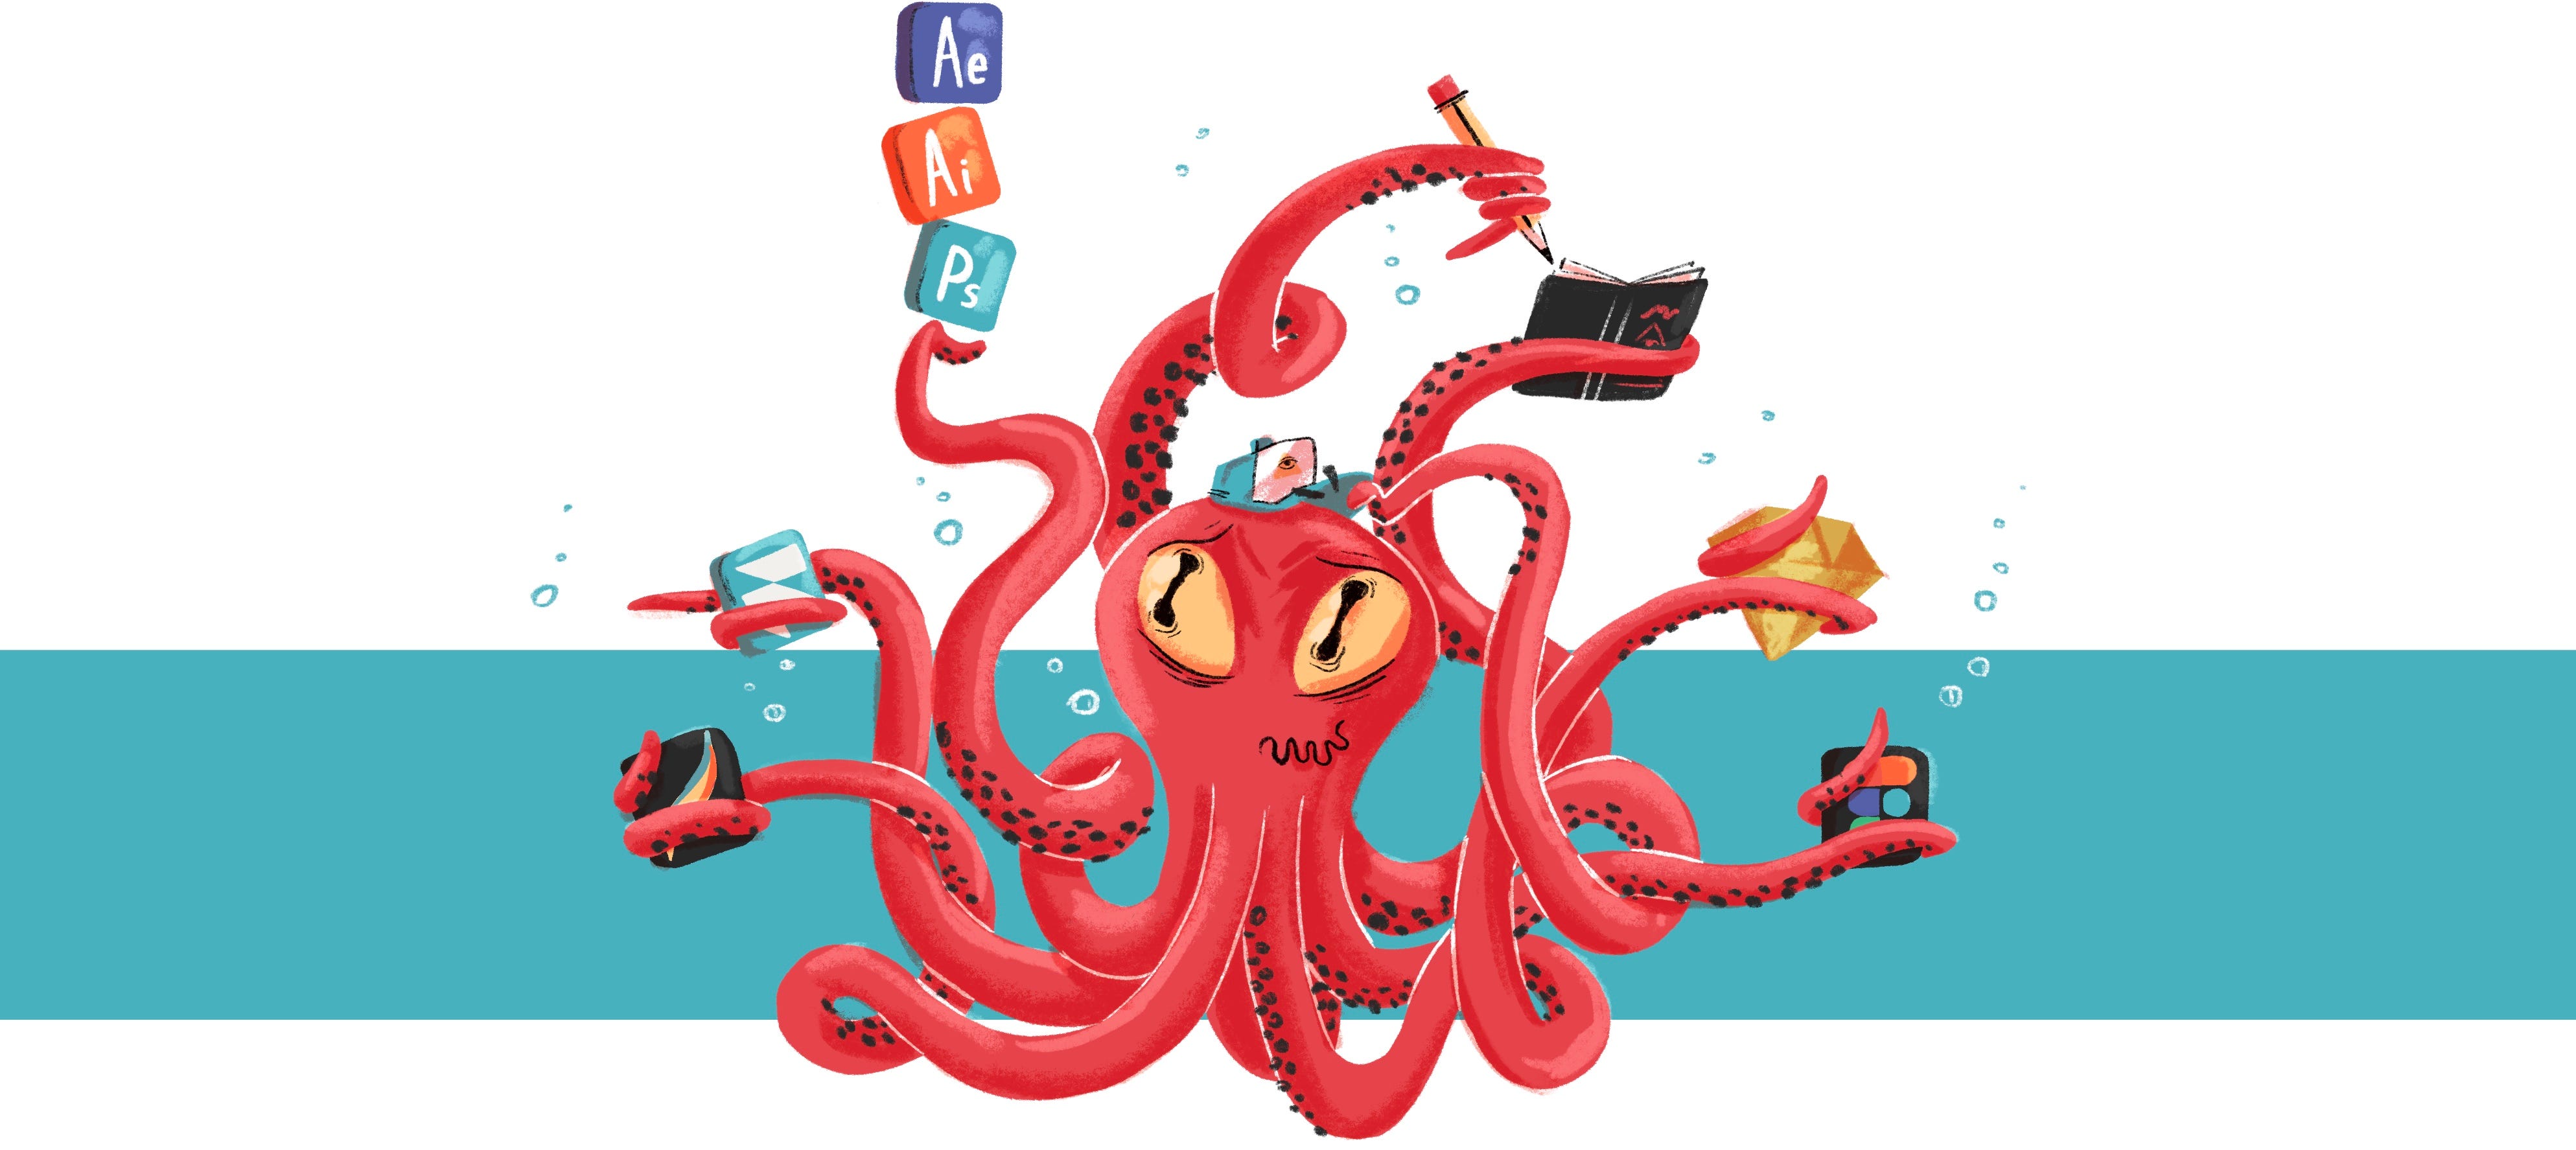 An octopus juggling several icons of design tools and drawing on a sketchbook with its tentacles.